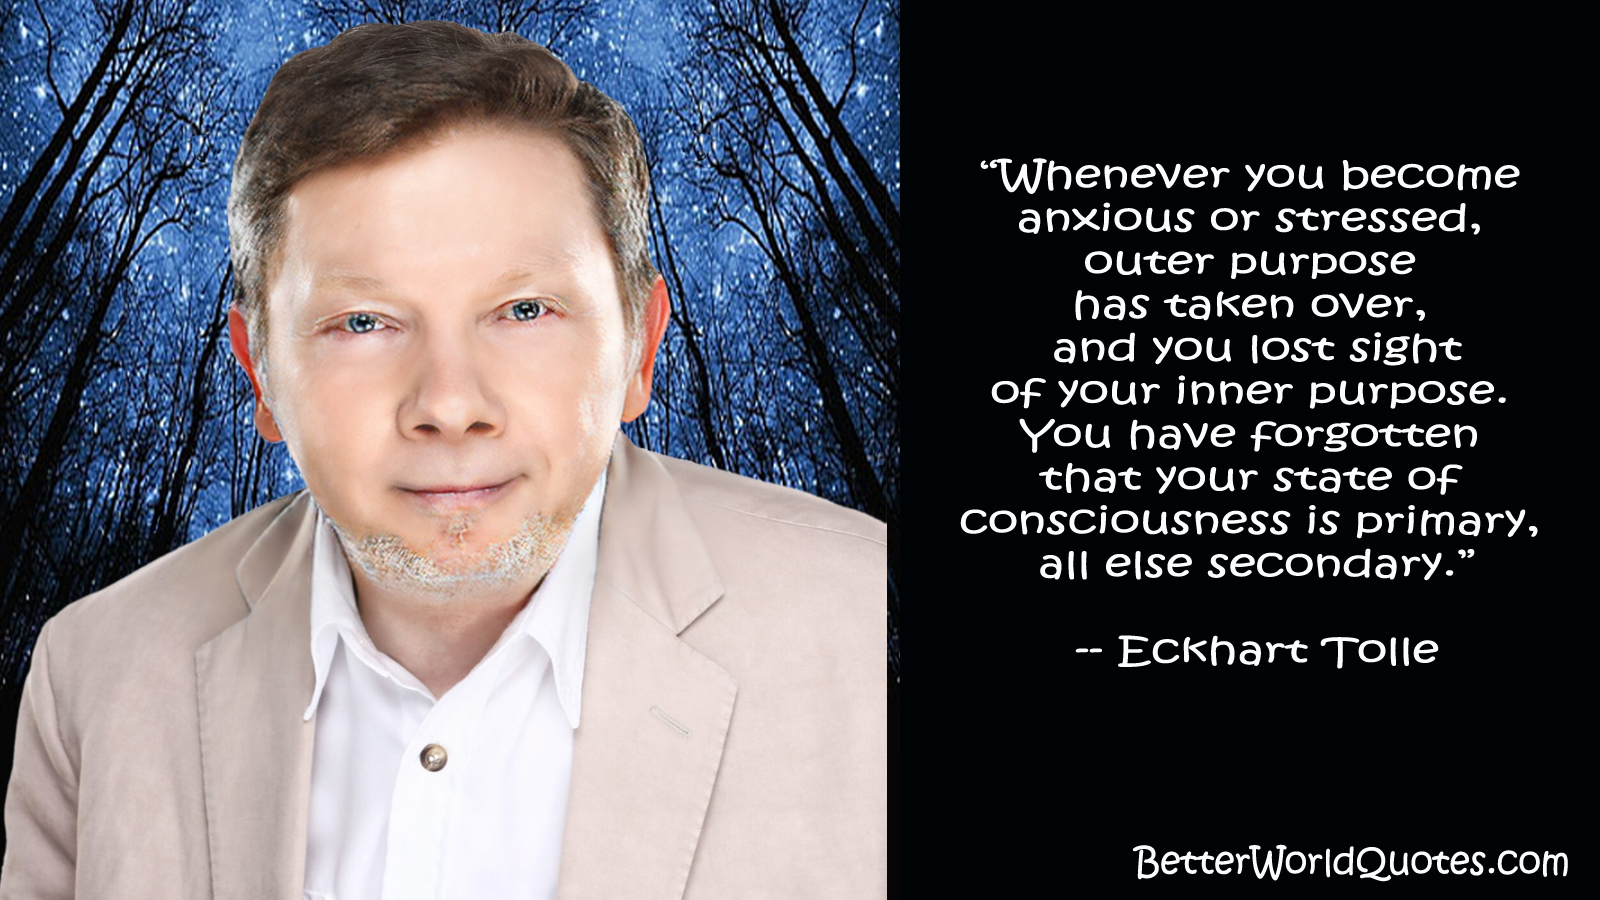 Eckhart Tolle: Whenever you become anxious or stressed, outer purpose has taken over, and you lost sight
of your inner purpose. You have forgotten that your state of consciousness is primary, all else secondary.
 Eckhart Tolle
